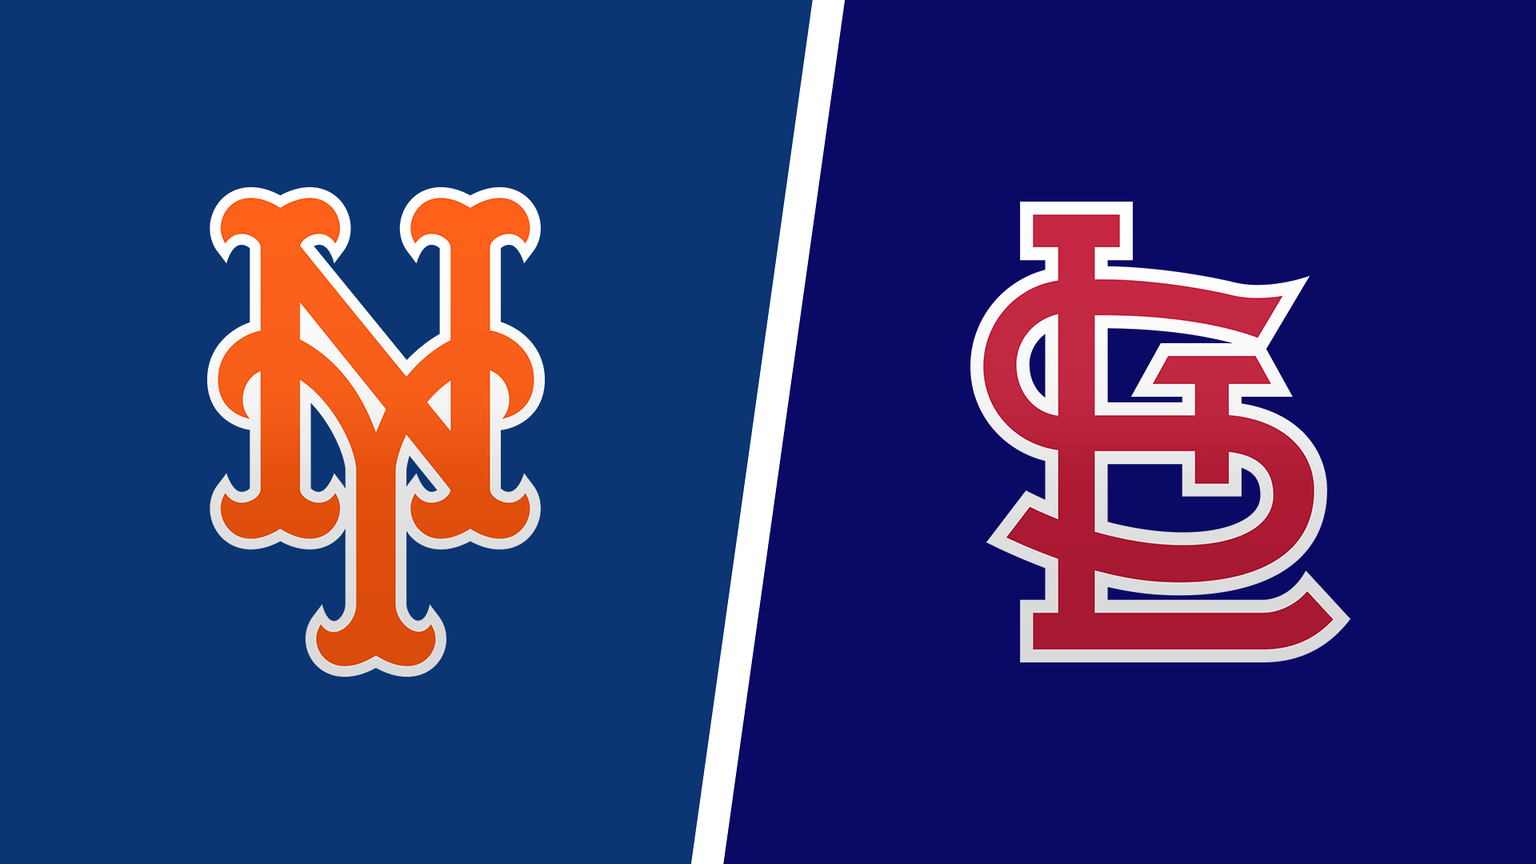 How to Watch St. Louis Cardinals vs. New York Mets Live Online Without